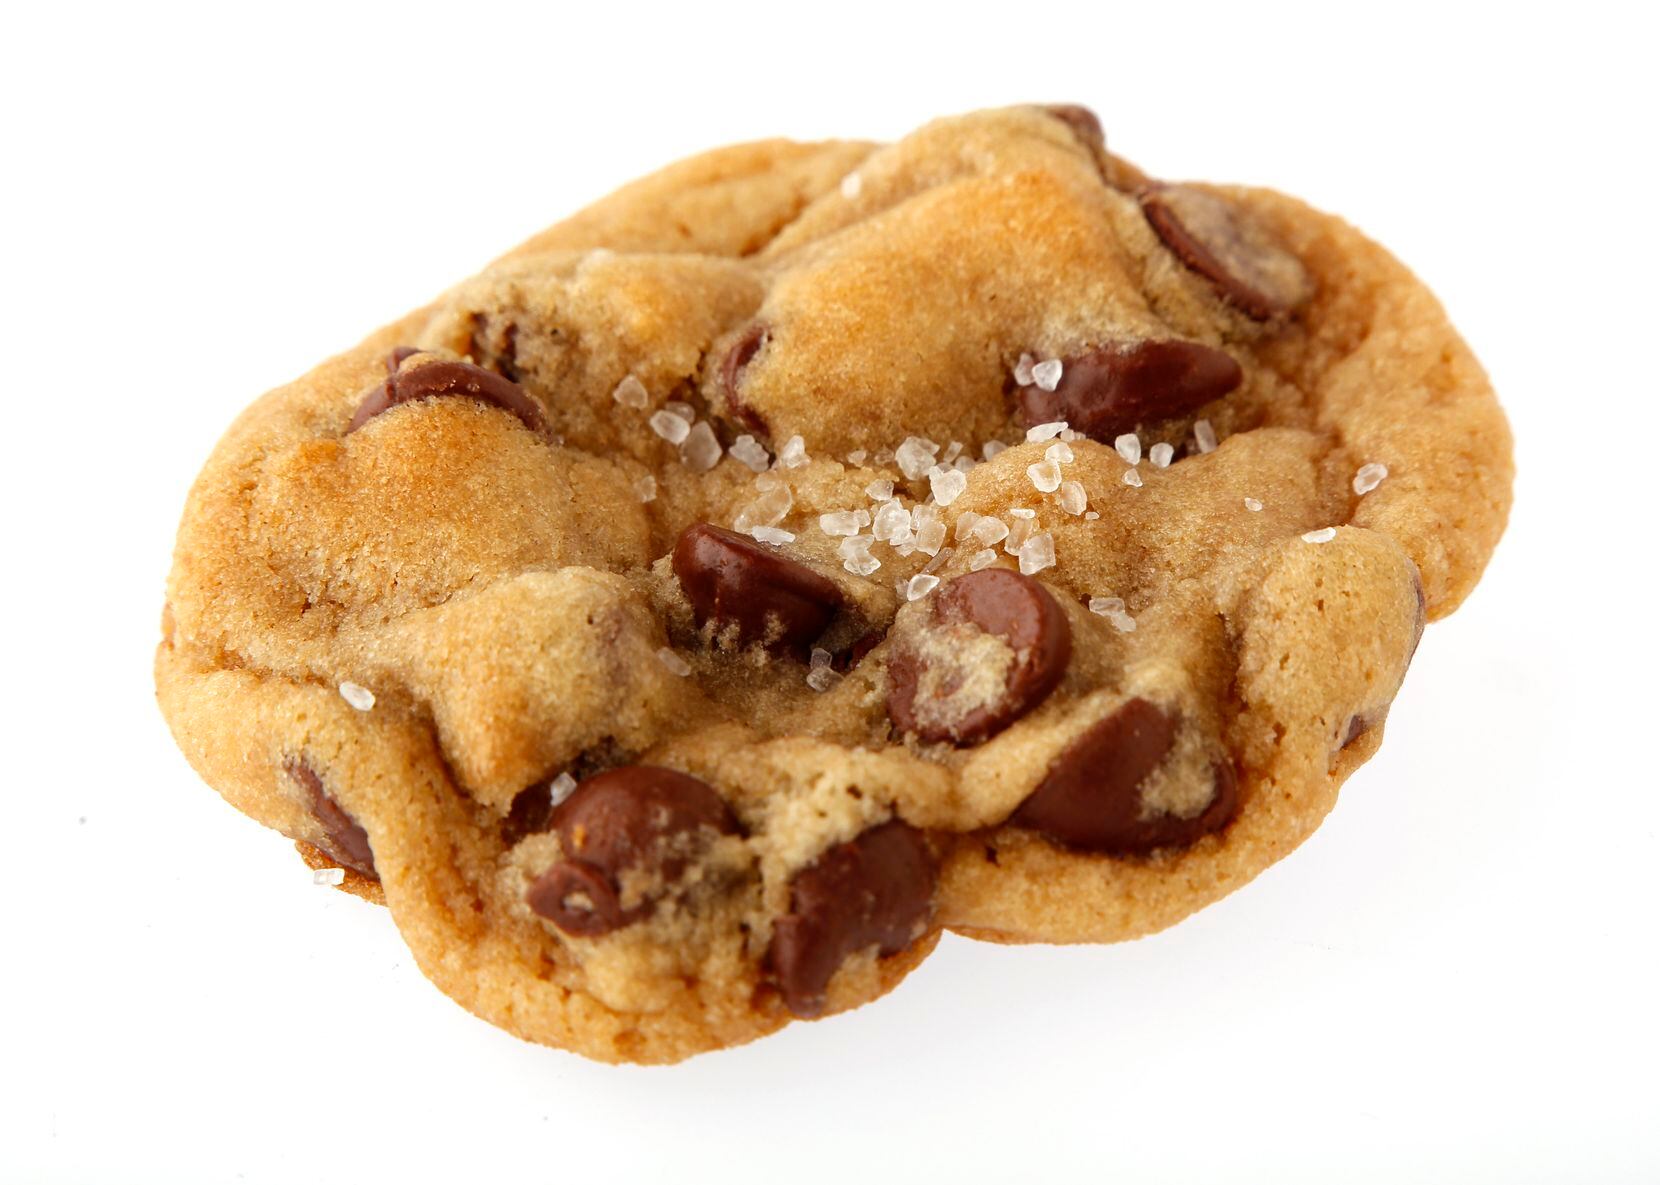 Garrett Middendorf placed second in Kids Choice with Sweet & Salty Choco Chip Cookies 